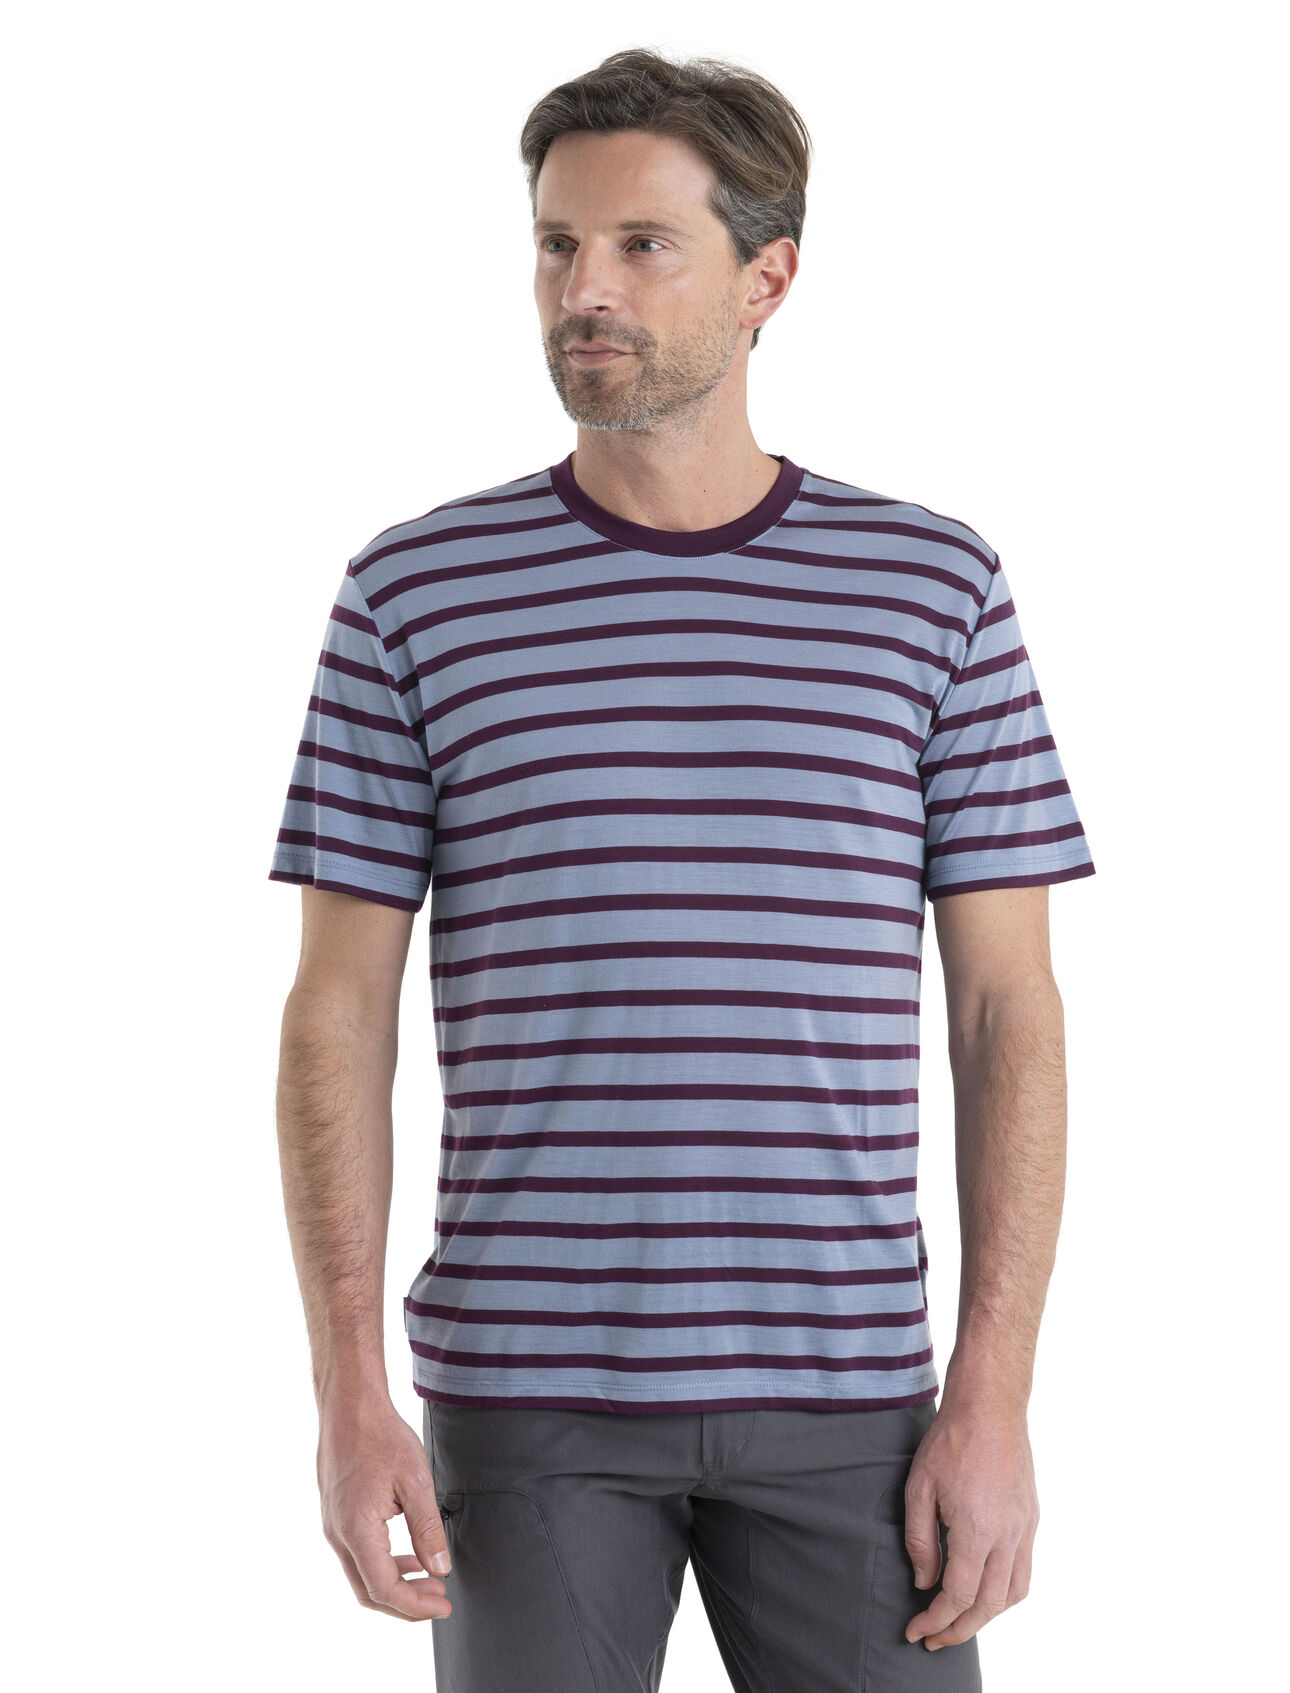 Mens Merino Drayden Short Sleeve T-Shirt Stripe A classic, stylish tee with everyday versatility and incredible breathability, the Drayden Short Sleeve Tee Stripe features our moisture-managing Cool-Lite™ merino jersey fabric.